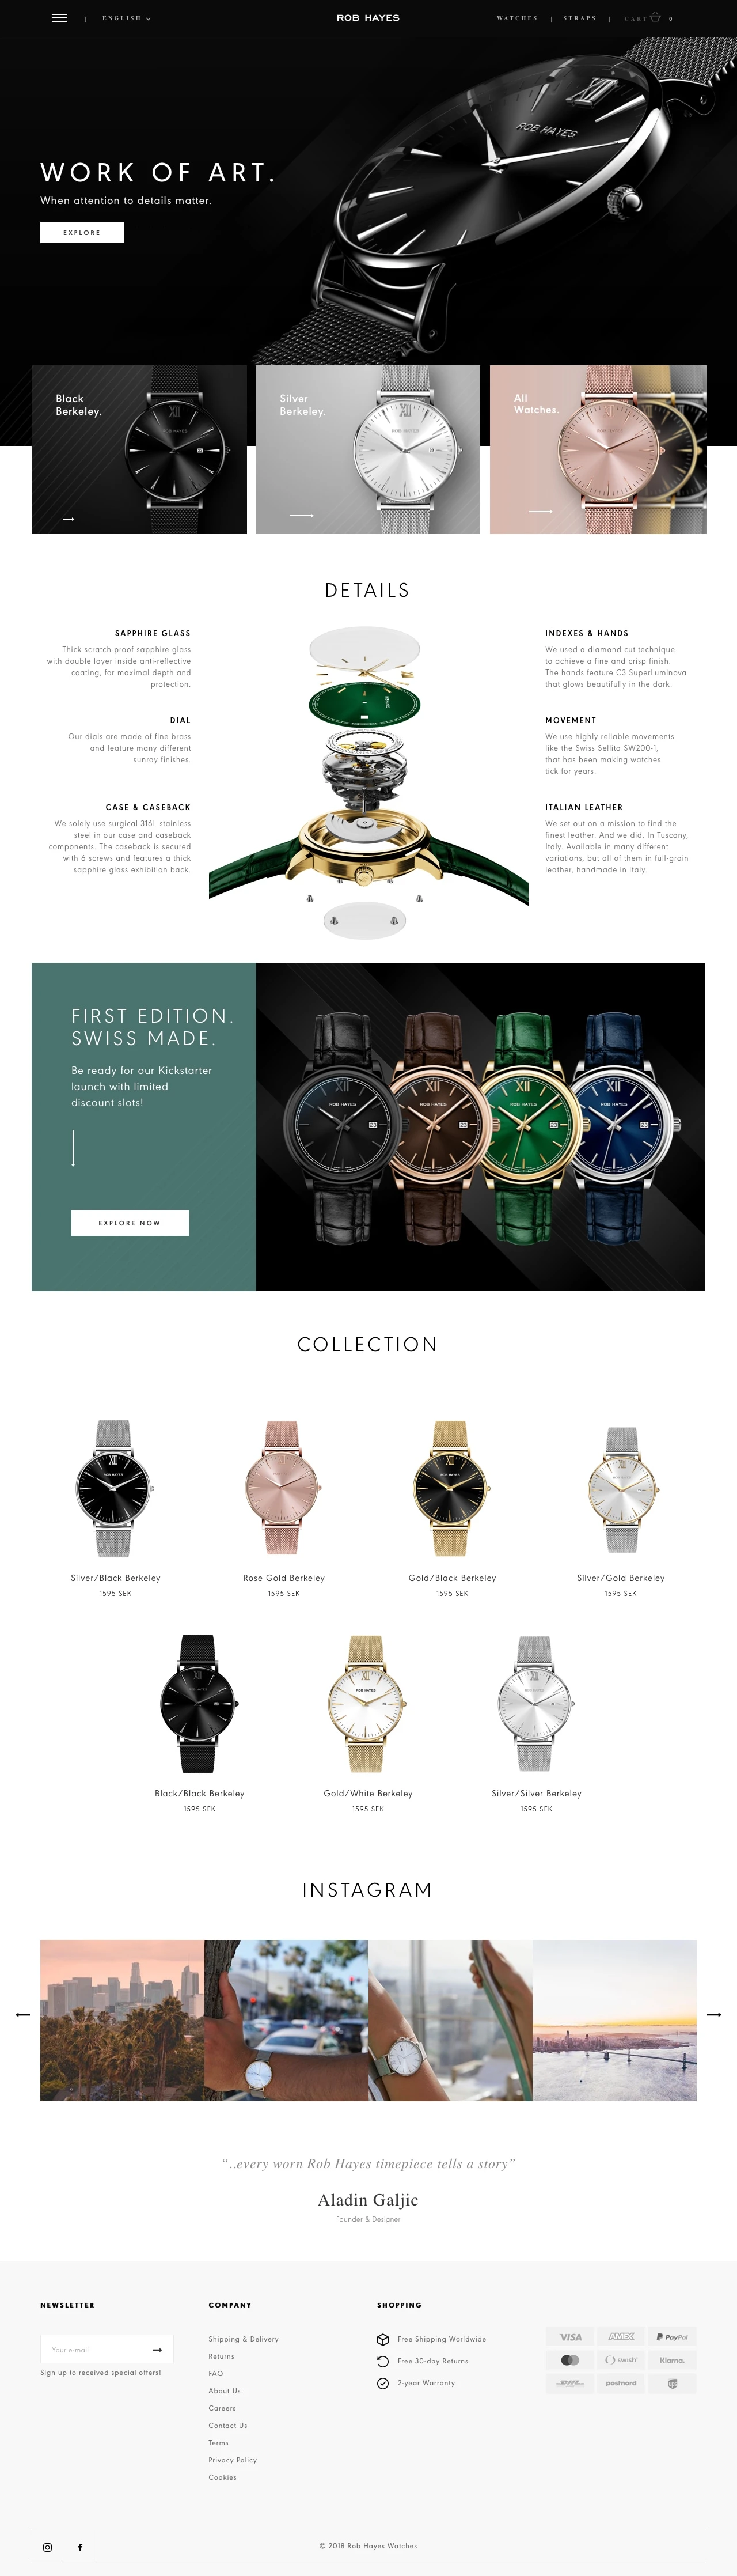 ROB HAYES Landing Page Example: A Swedish watchmaker. When quality matters.